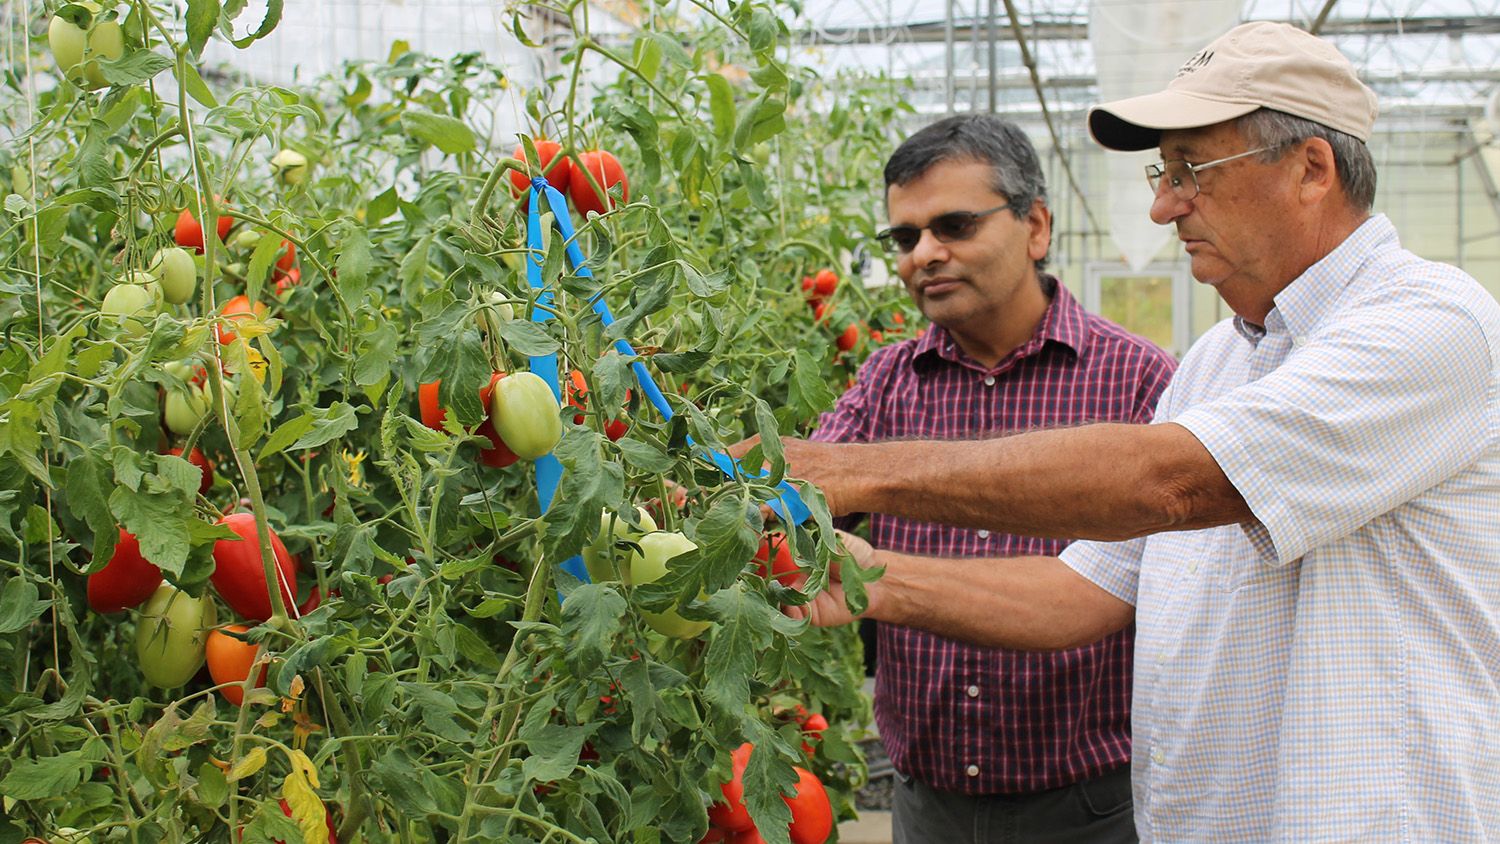 Two scientists look at tomatoes growing in a greenhouse.